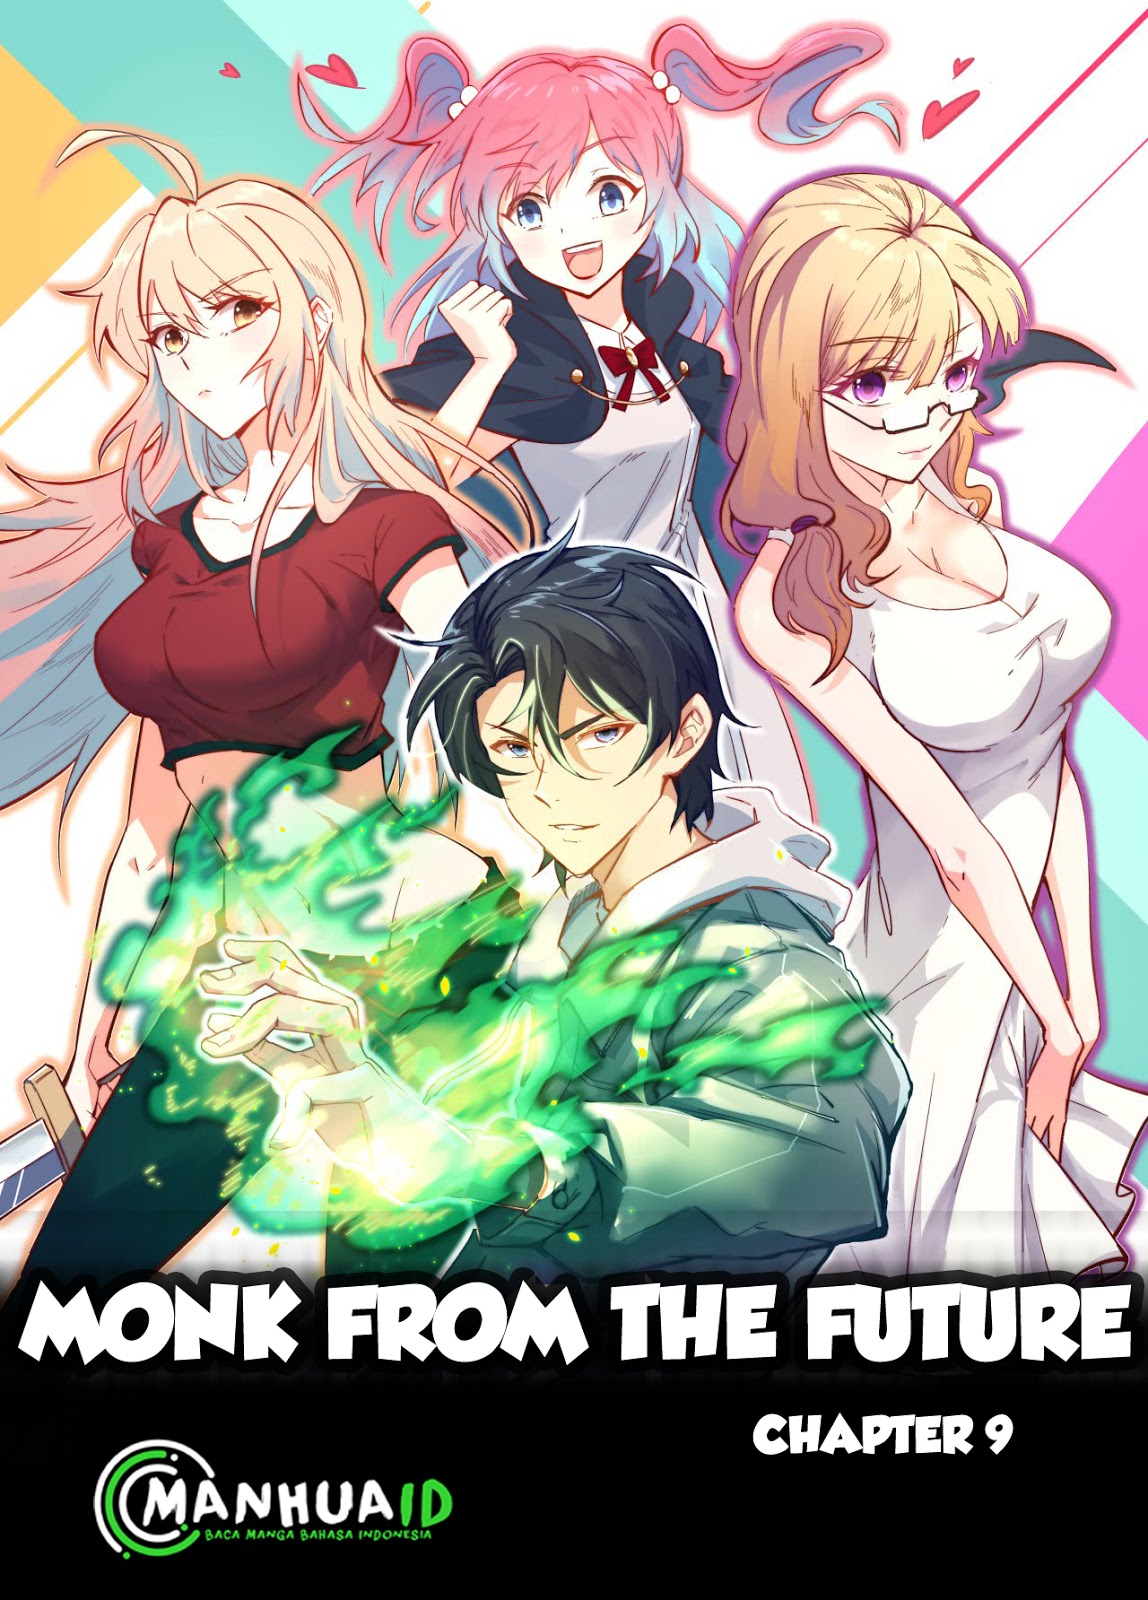 Monk From the Future Chapter 9